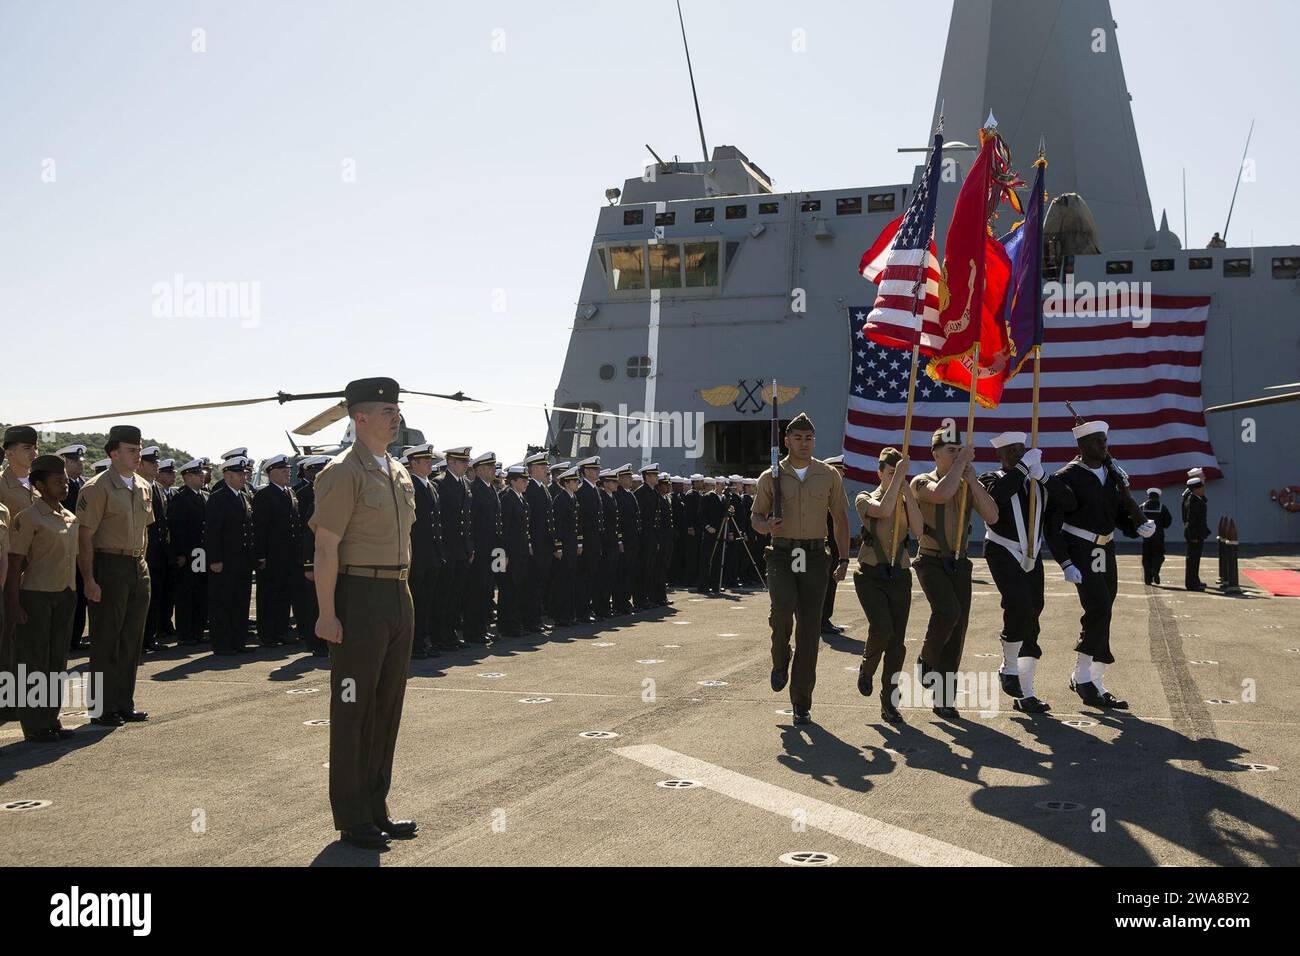 US military forces. 170505OC926-036 SOUDA BAY, Greece (May 5, 2017) The joint color guard of the 24th Marine Expeditionary Unit (MEU) and amphibious transport dock ship USS Mesa Verde (LPD 19) parades across the flight deck during a change of command ceremony May 5, 2017. The 24th MEU is underway with the Bataan Amphibious Ready Group in support of maritime security operations and theater security cooperation efforts in the U.S. 6th Fleet area of operations. (U.S. Marine Corps photo by Cpl. Hernan Vidaña) Stock Photo